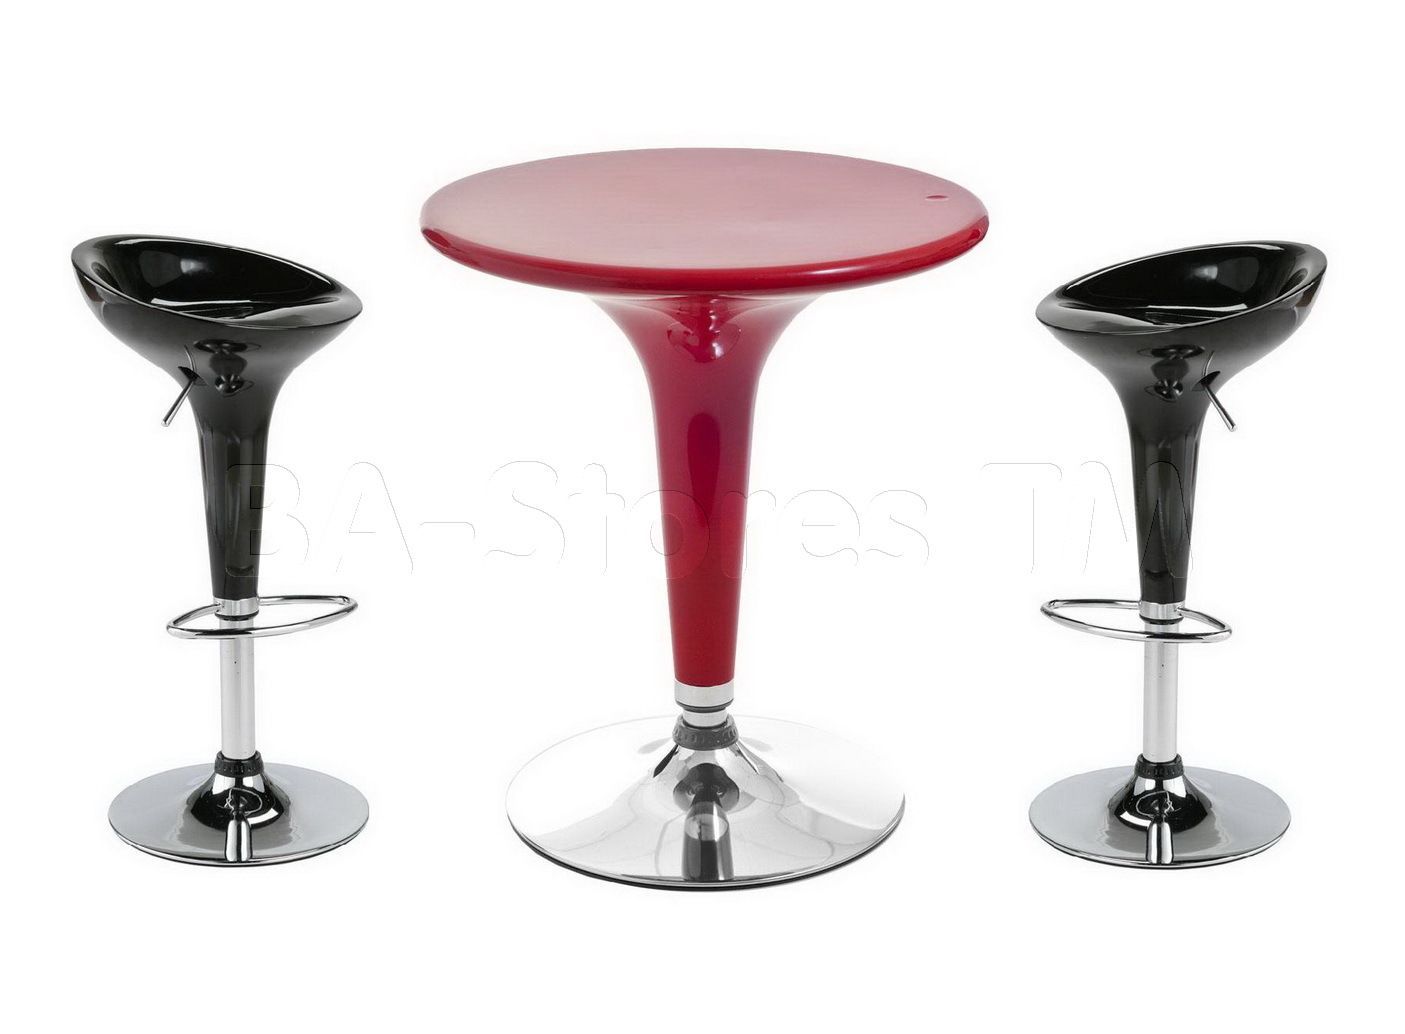 Clyde/gretta 3 Pc Red And Black Bar Set (Table And 2 Bar Pertaining To Most Popular Clyde Round Bar Tables (View 9 of 25)